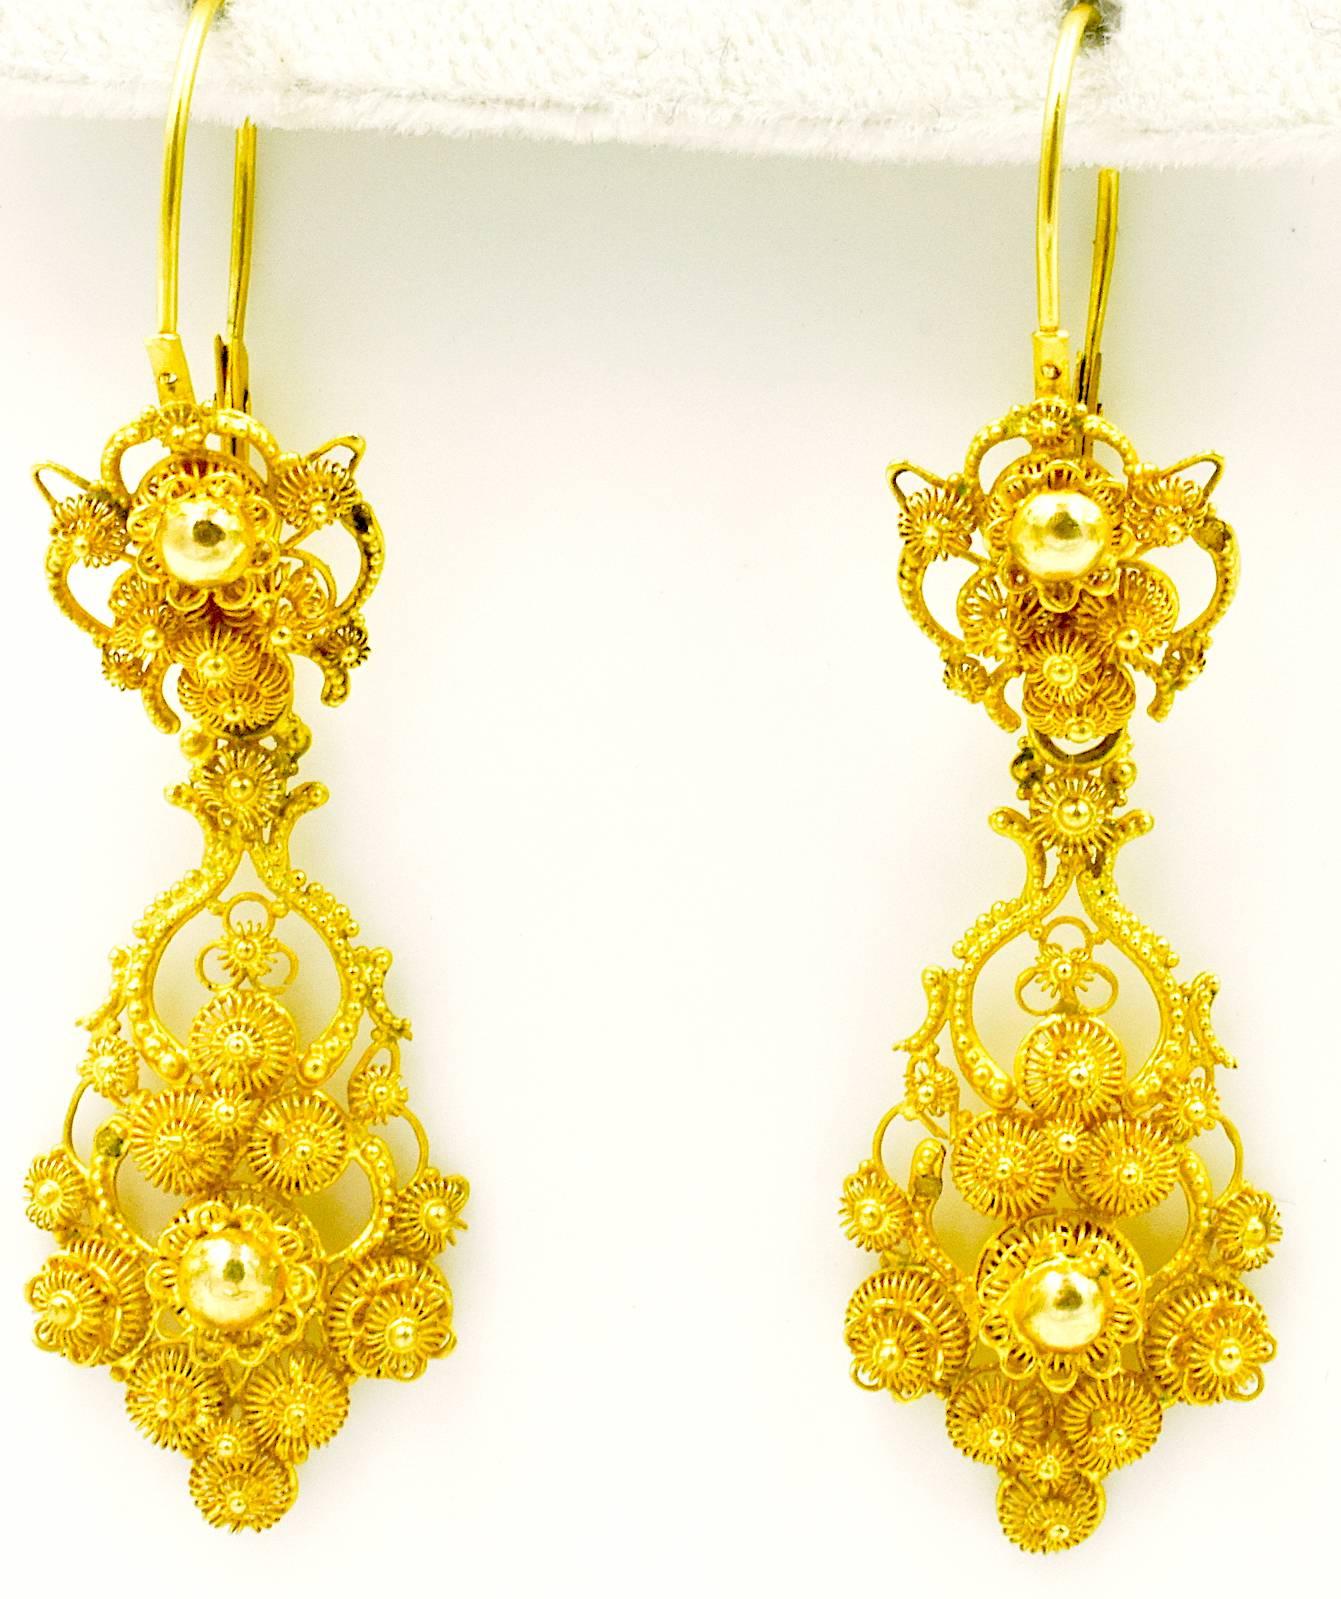 Fabulous cannetille 18K gold earrings made in Amsterdam by Gerdes & Pisort in the 1840's. Cannetille jewelry was based on a style of fabric embroidery that was adapted to precious metal. It is made with fine, twisted wire or thin sheets of gold.